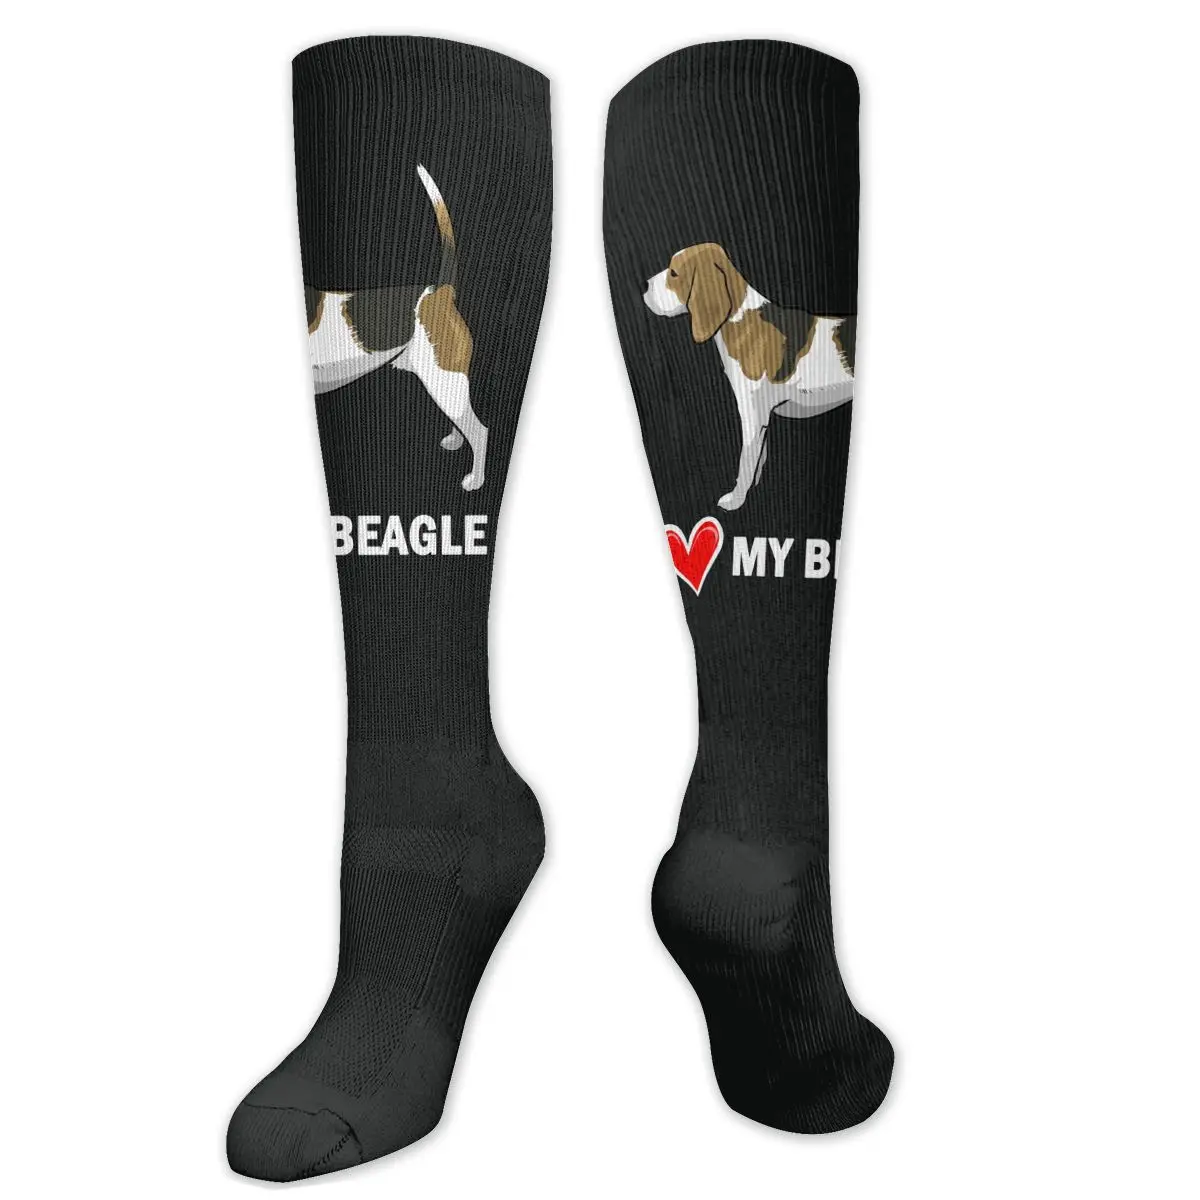 

I Love My Beagle 1 Compression Socks For Women Men Plus Size Wide Calf For Nurses Running Athletic